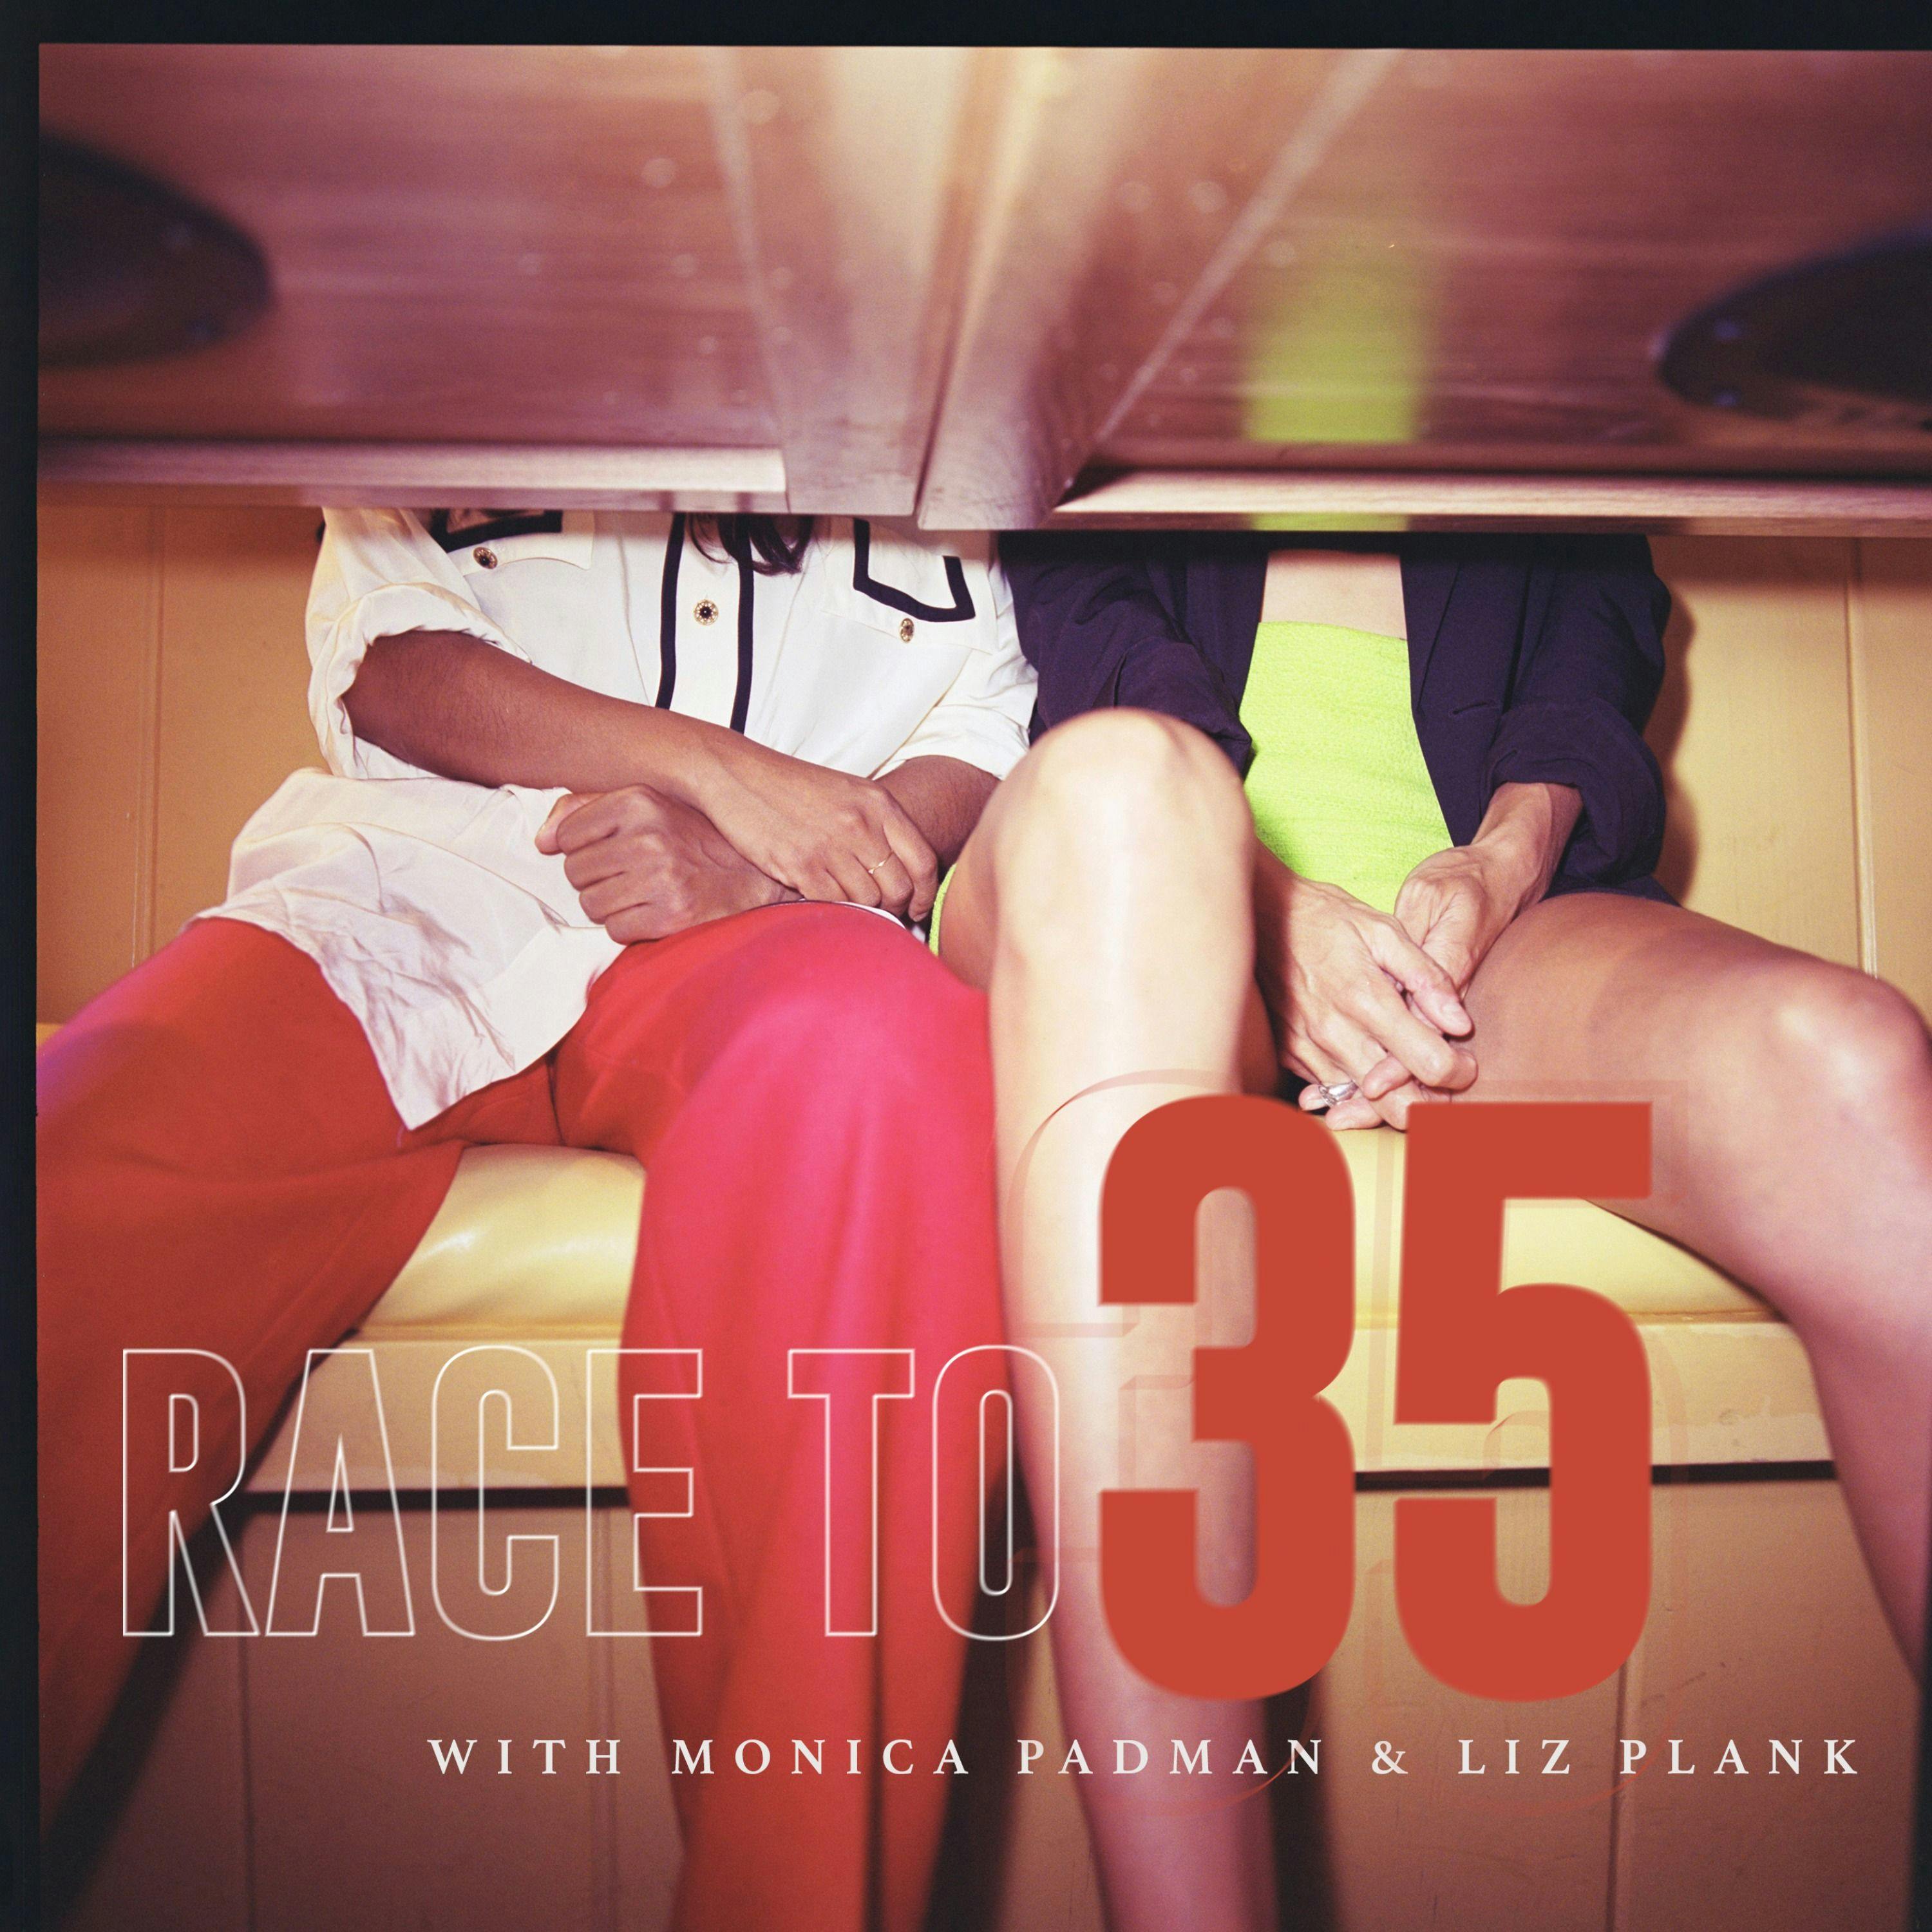 Introducing... Race to 35 by Armchair Umbrella